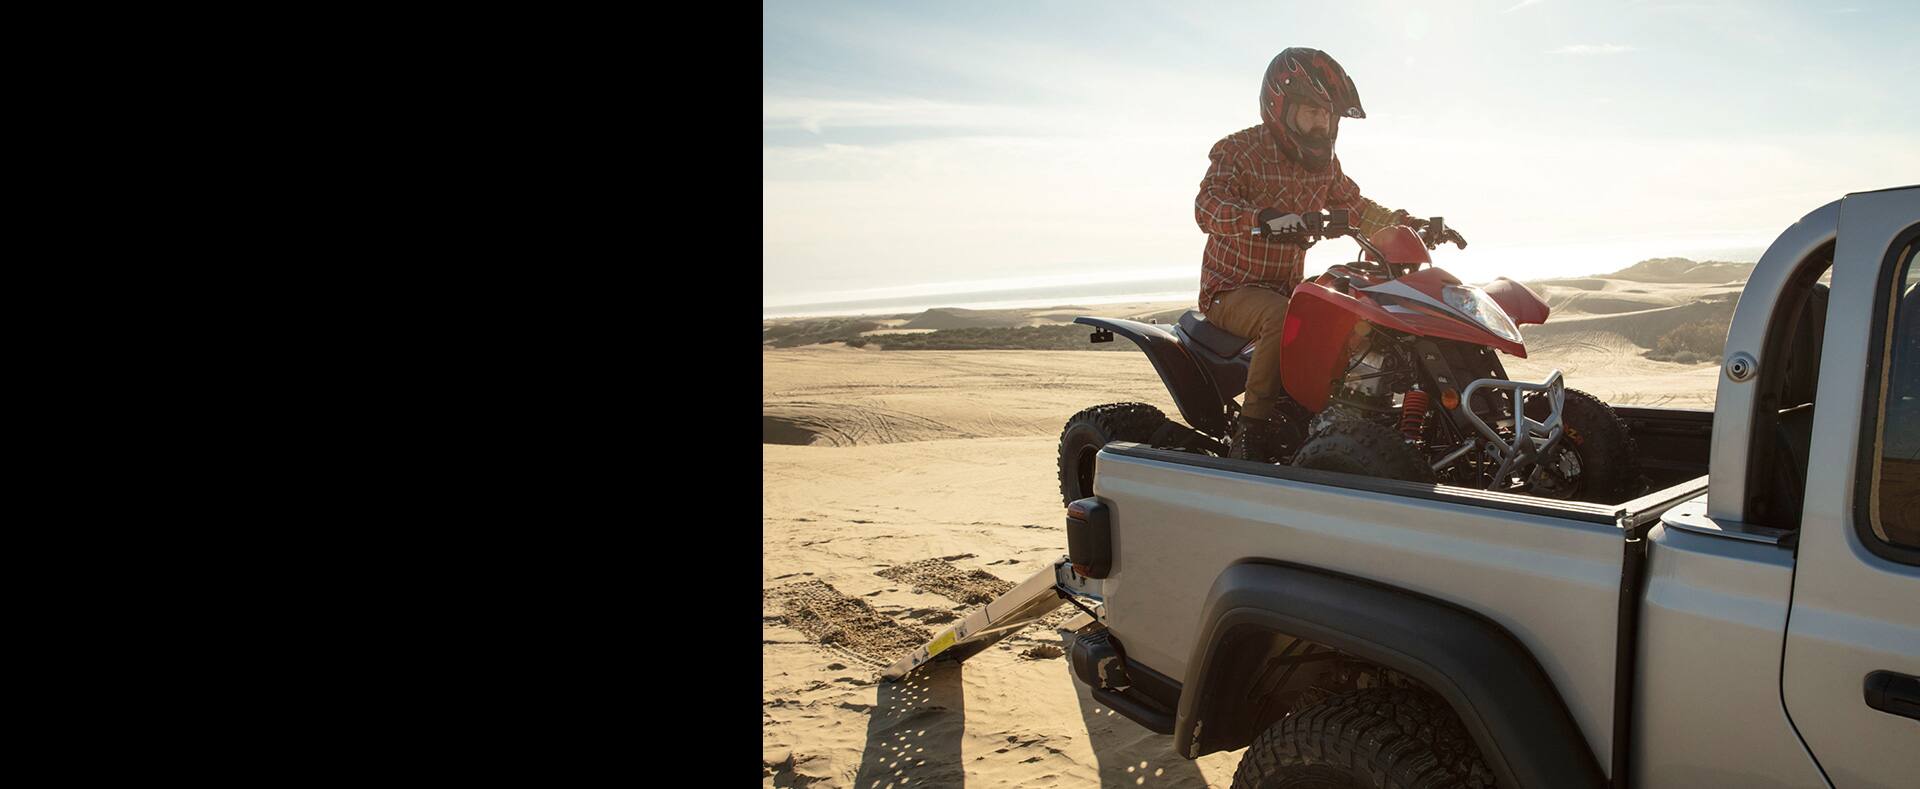 The bed of the 2021 Jeep Gladiator with a dirt bike on board.